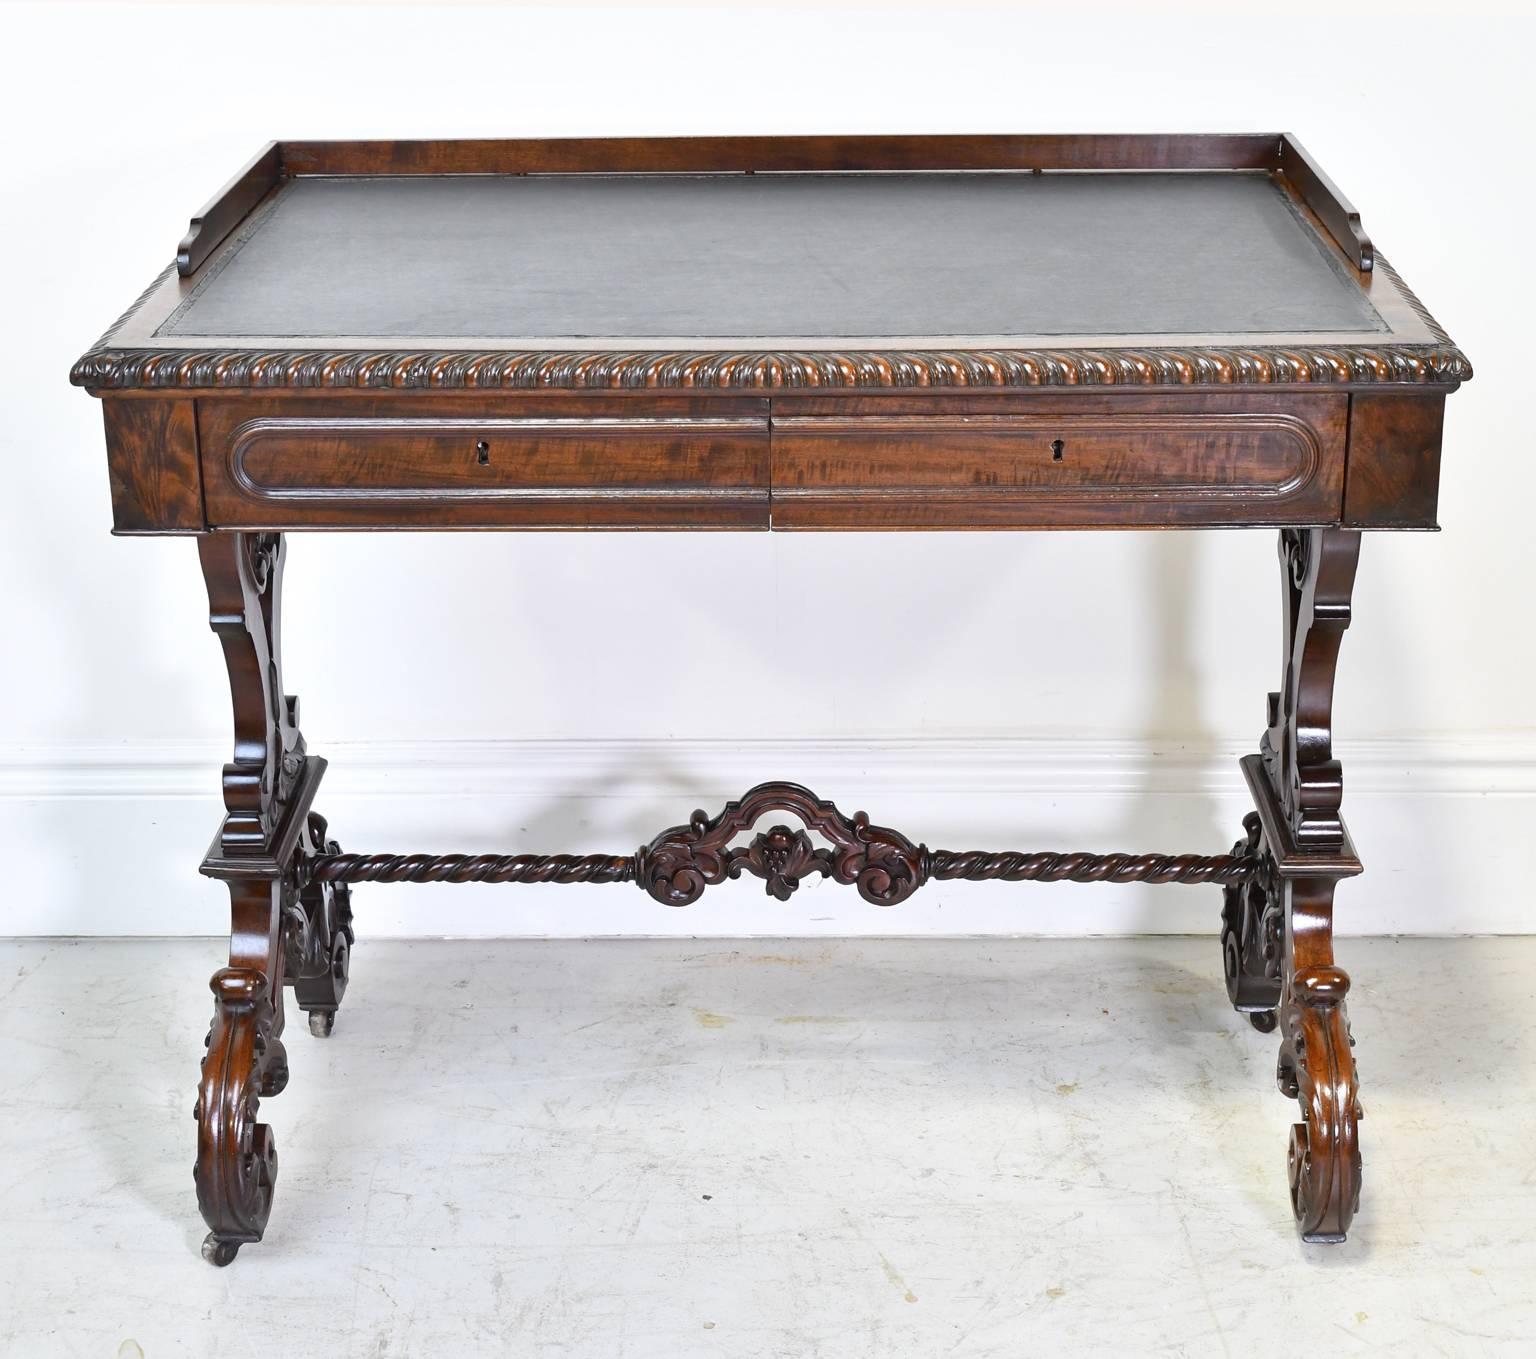 A very handsome American Rococo Revival writing table in fine plum mahogany attributable to well-known New York City cabinet maker, Joseph Meeks & Sons. Features inset leather top with tooled border, well-articulated gadrooning along table edge, two